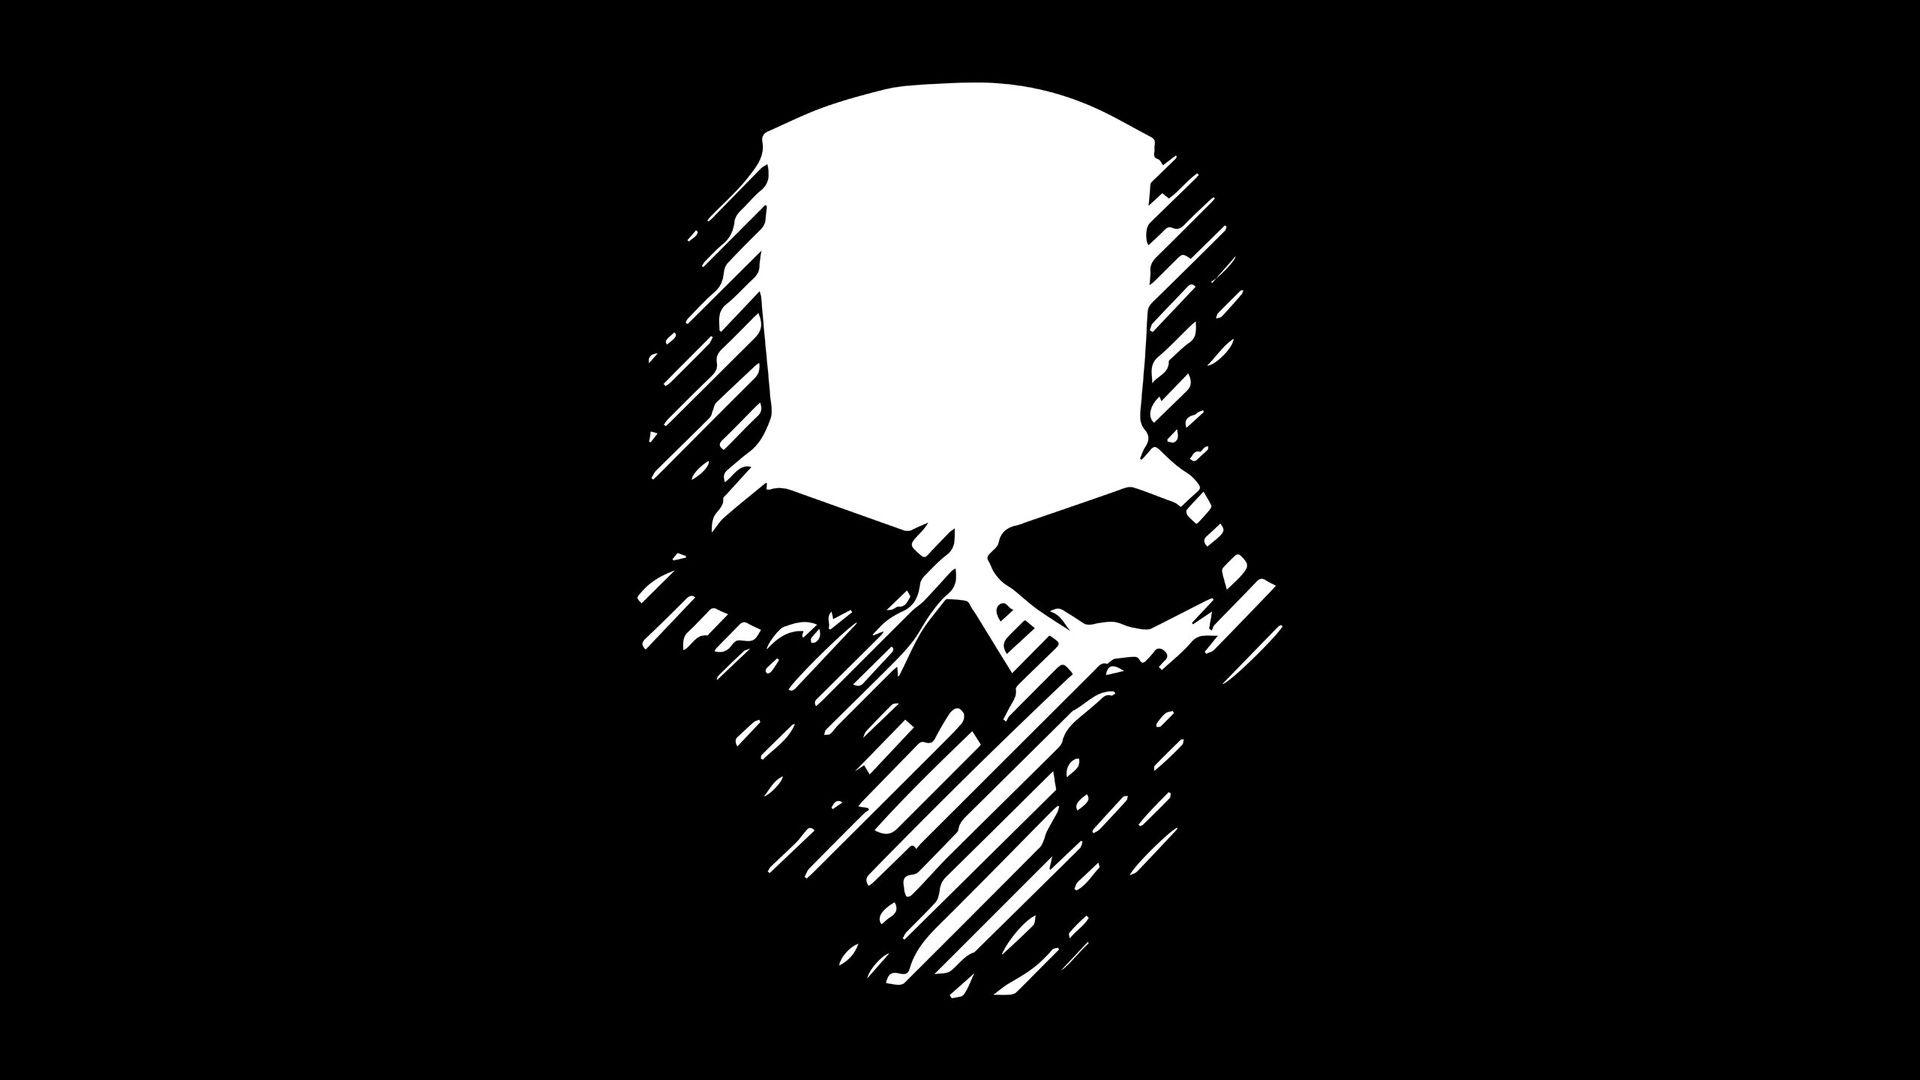 Black and White Ghost Logo - Ghost unit emblem Wallpaper from Tom Clancy's Ghost Recon: Wildlands